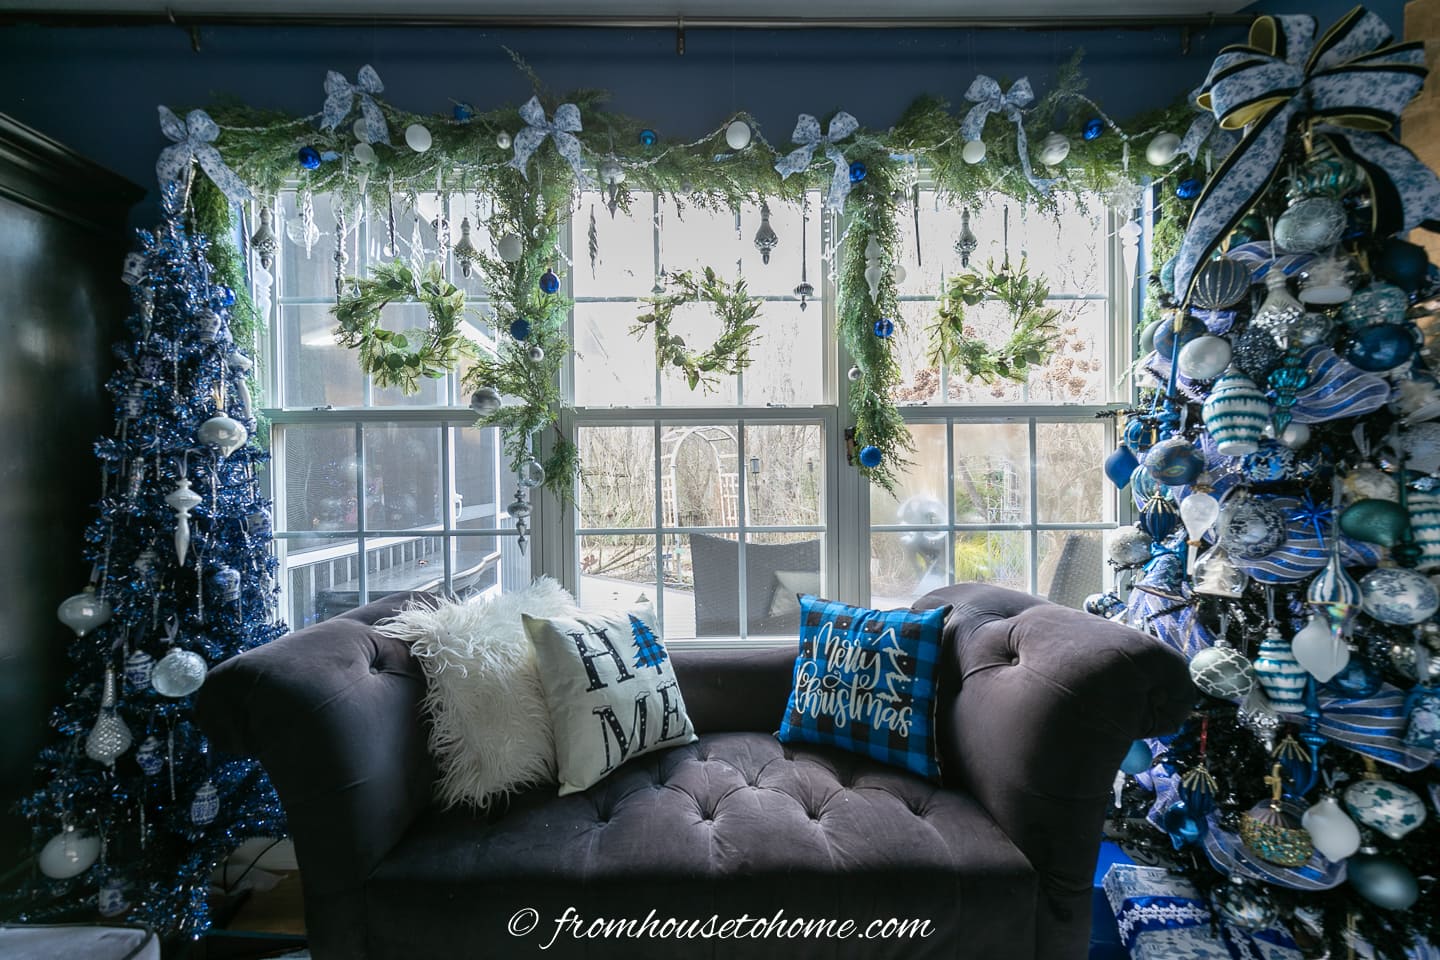 Decorated evergreen Christmas garland hung over a window with 3 wreaths